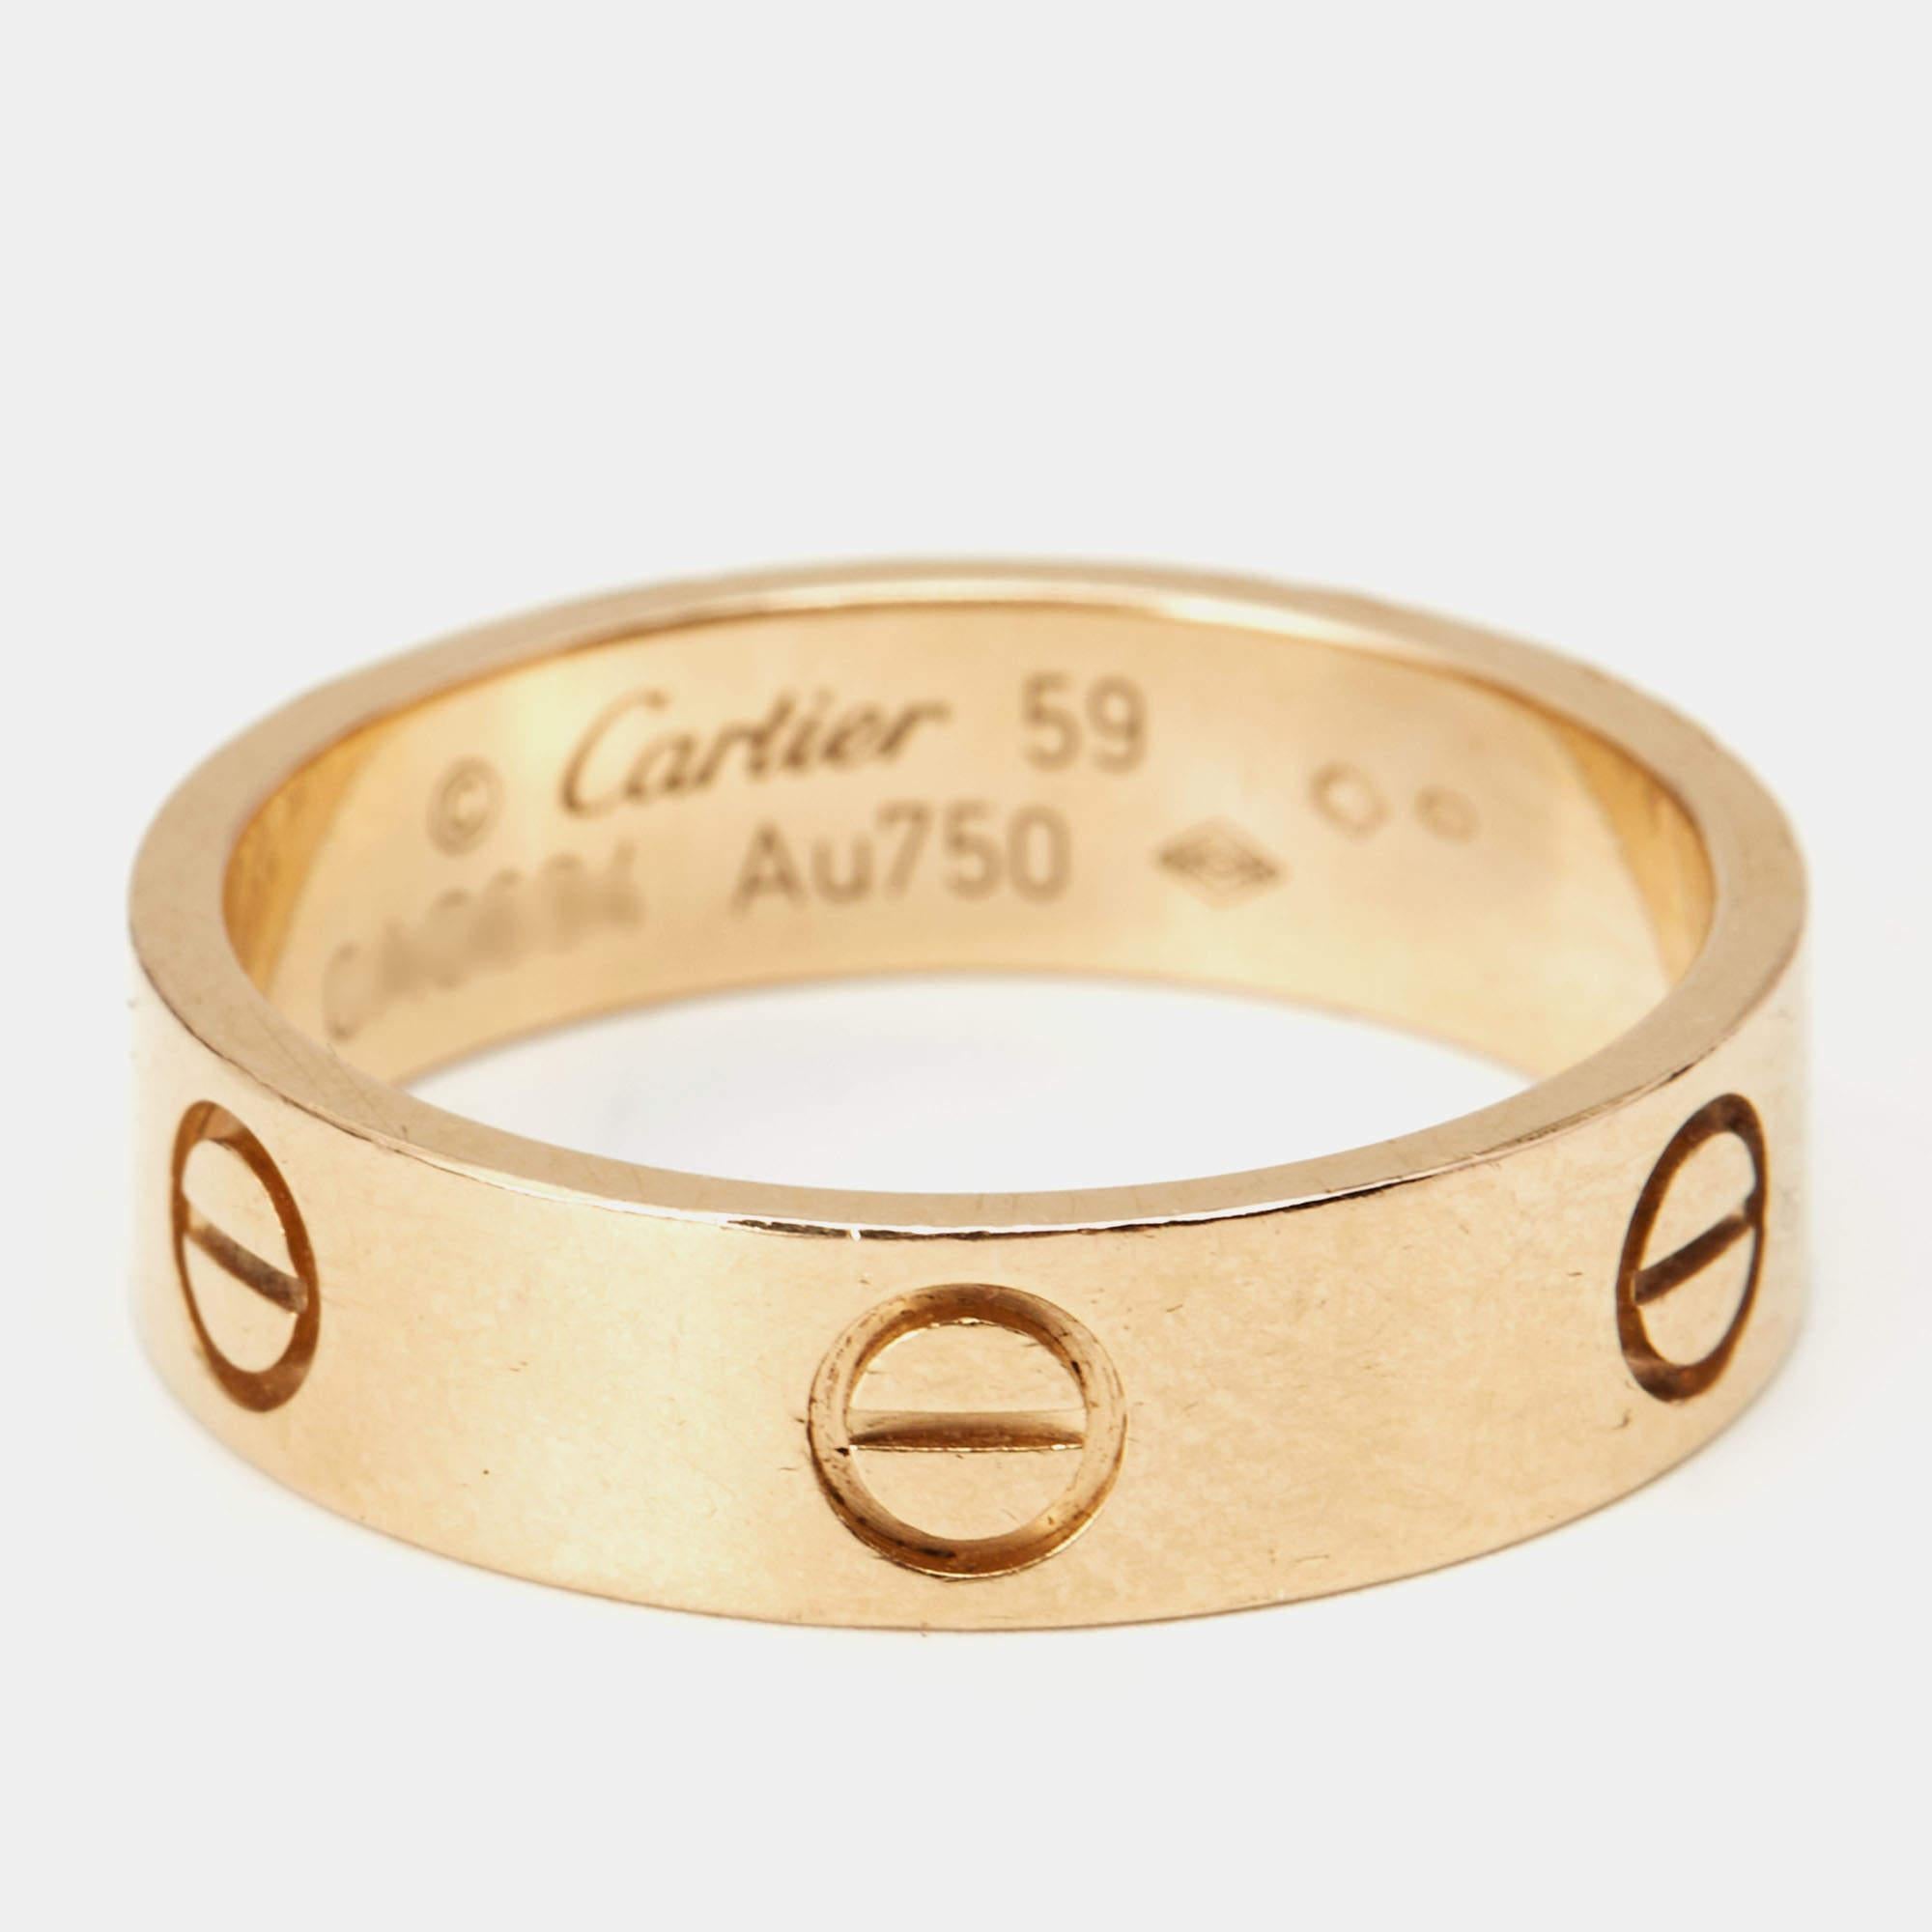 One of the most iconic and loved designs from the house of Cartier, this stunning Love ring is an icon of style and luxury. Constructed in 18k rose gold, this ring features screw details all around the surface as symbols of a sealed and secured